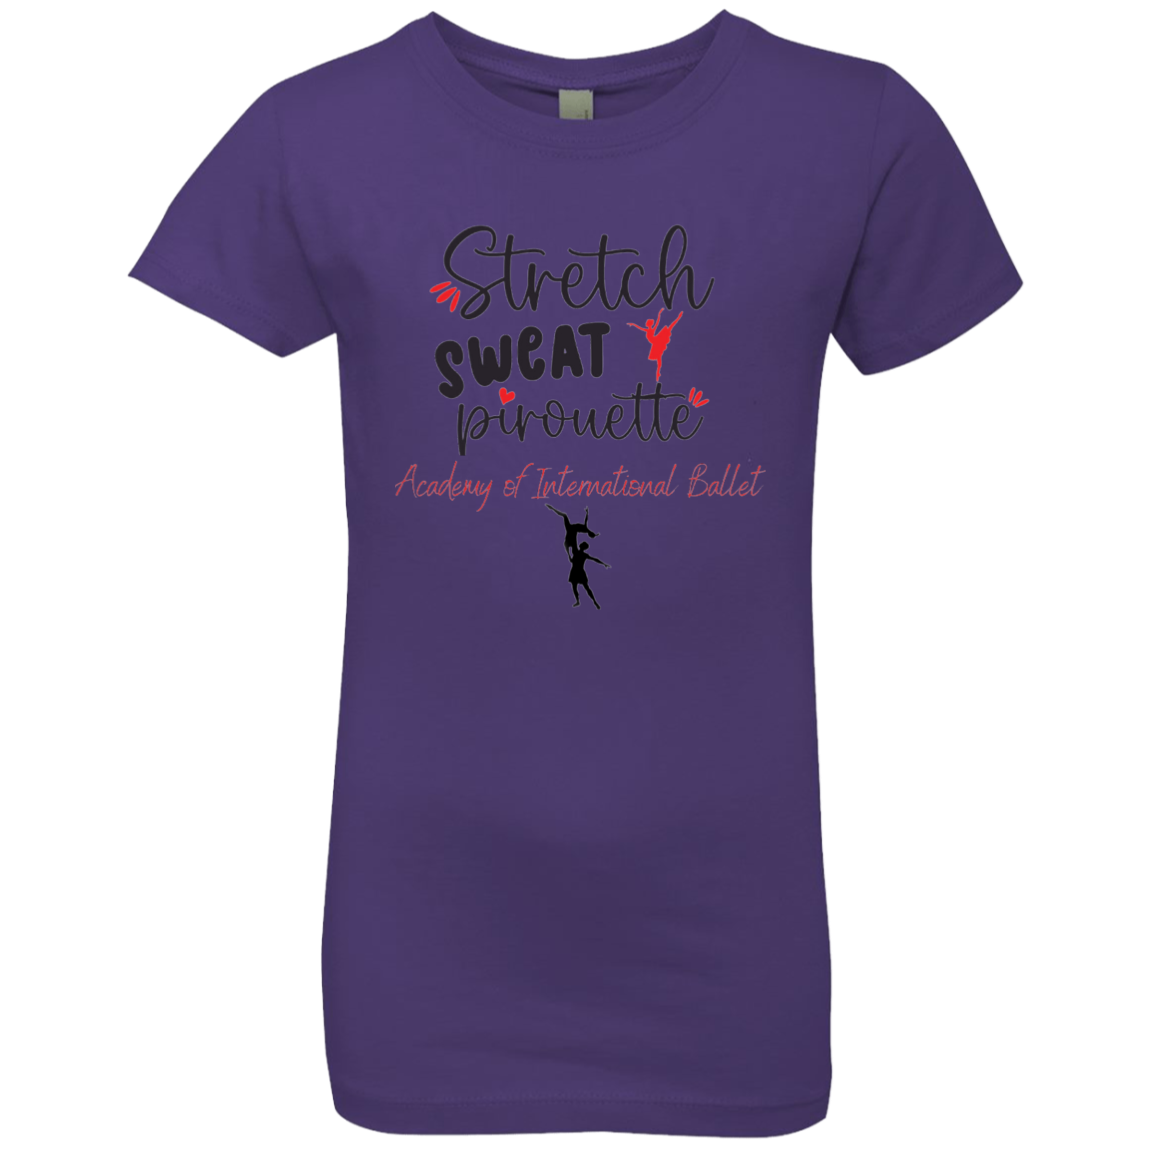 Stretch, Sweat, Pirouette- Youth fitted Girls Tee